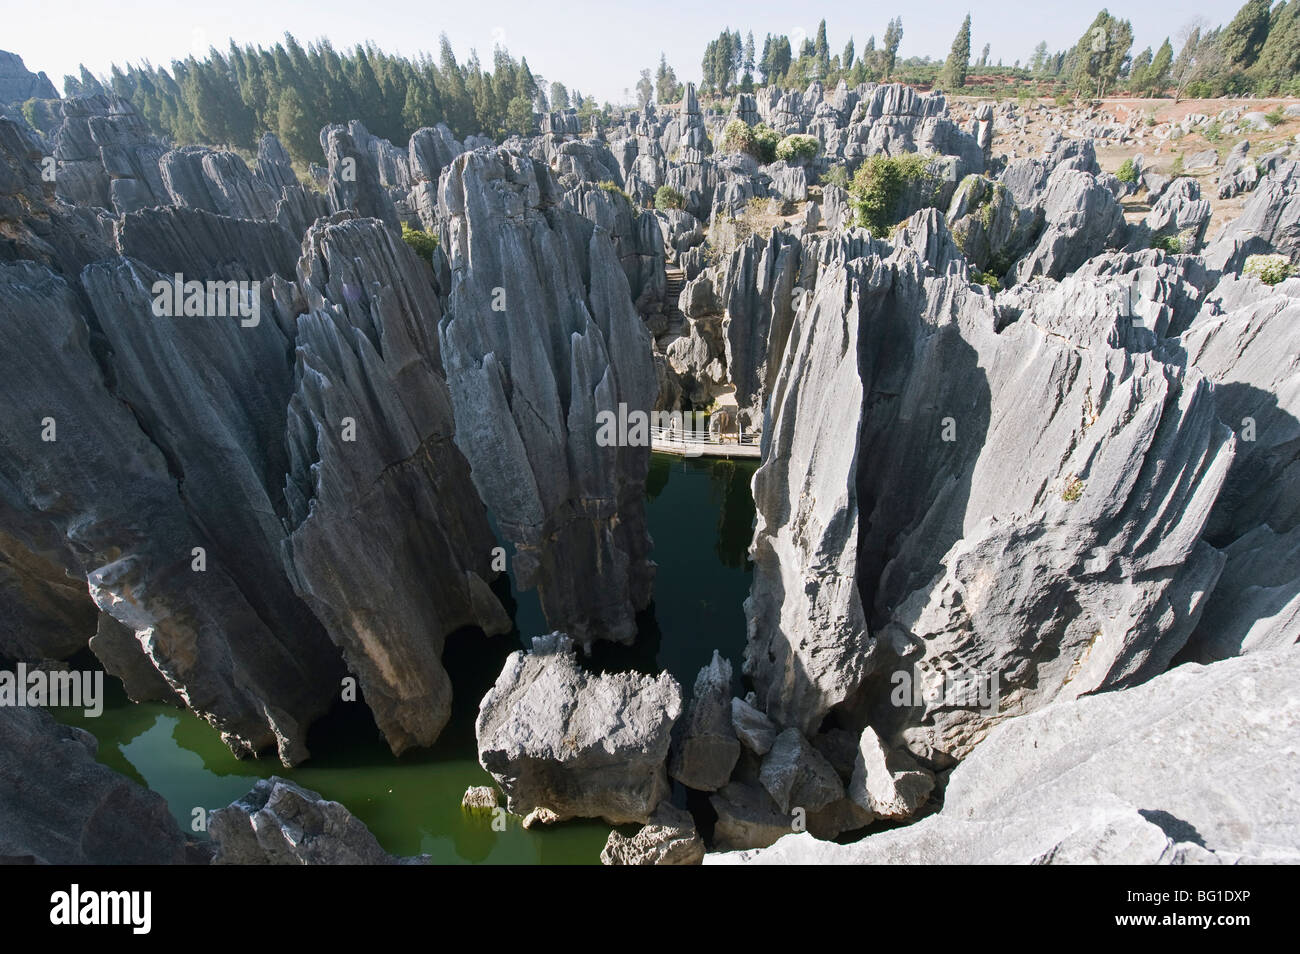 Shilin Stone Forest, UNESCO World Heritage Site, Yunnan Province, China, Asia Stock Photo